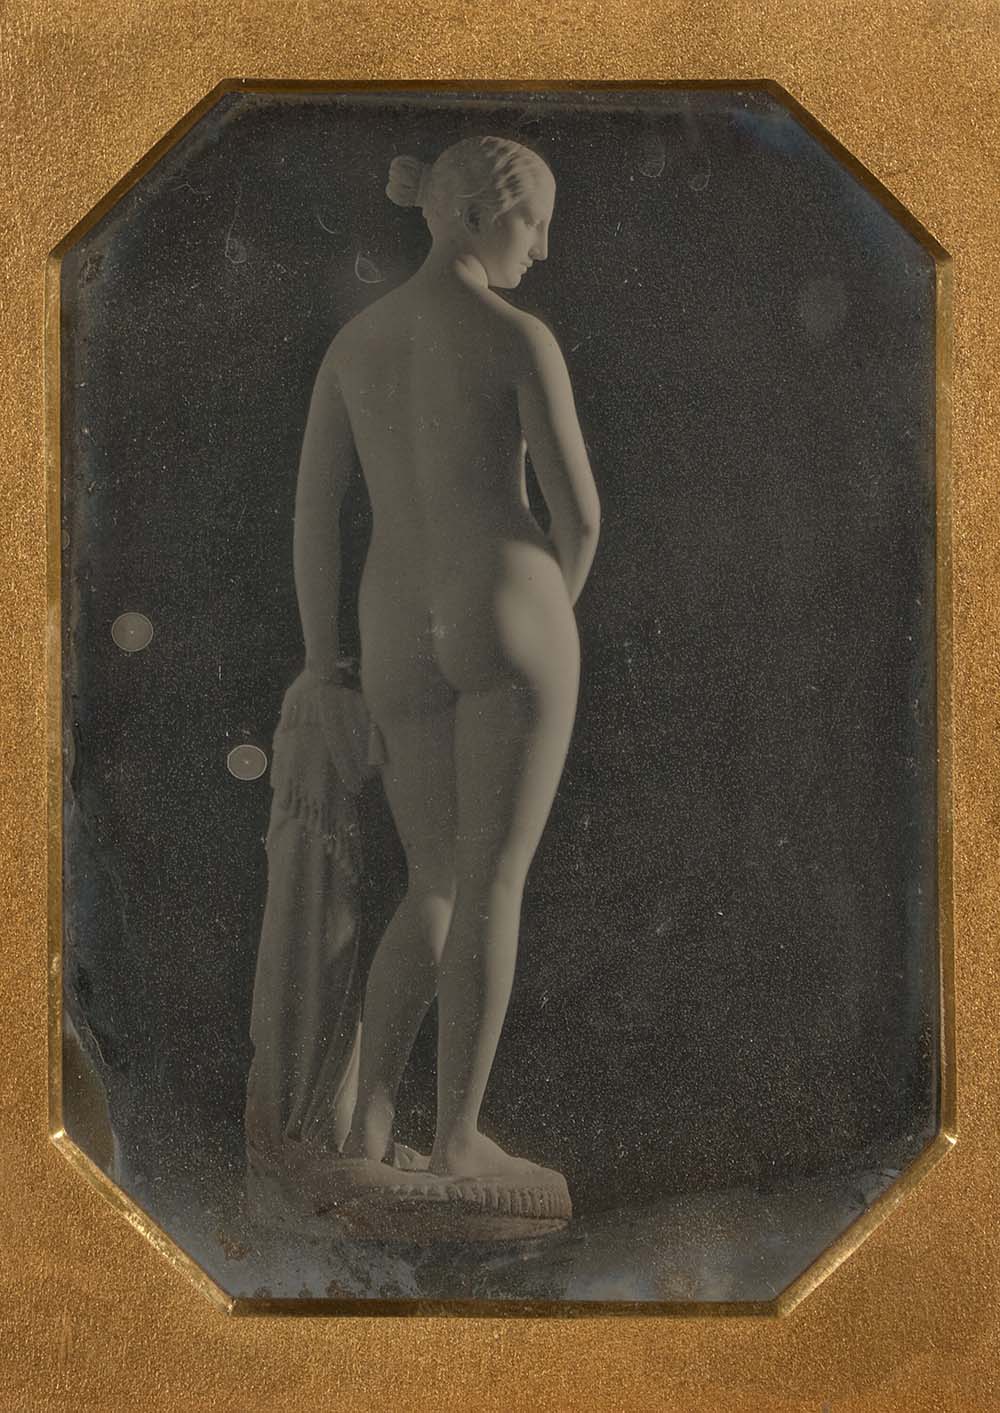 Daguerreotype of The Greek Slave by Hiram Powers, attributed to Southworth & Hawes, 1848.